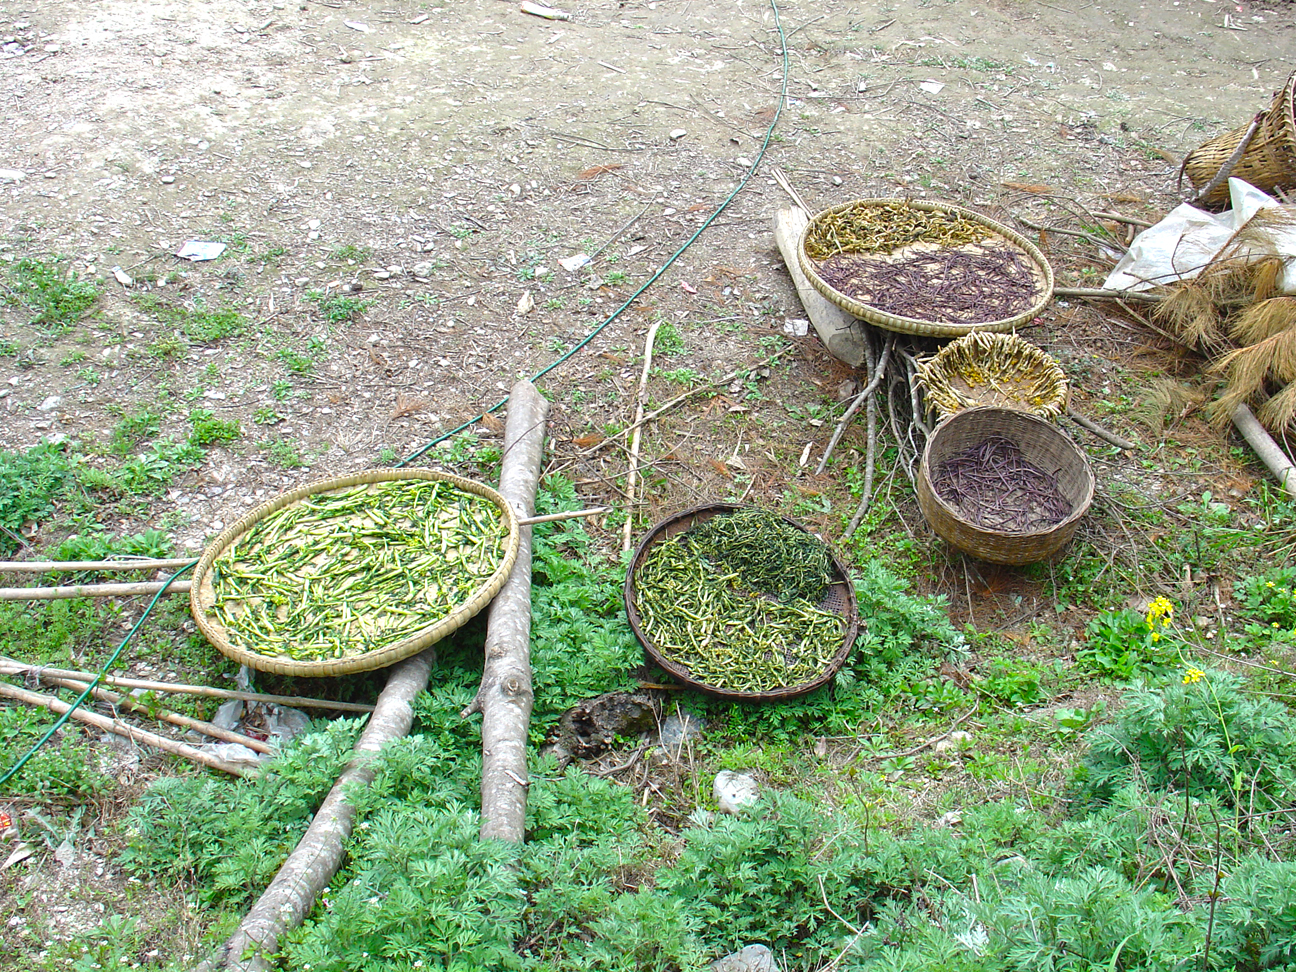 The small village on the hills II - Drying vegetables